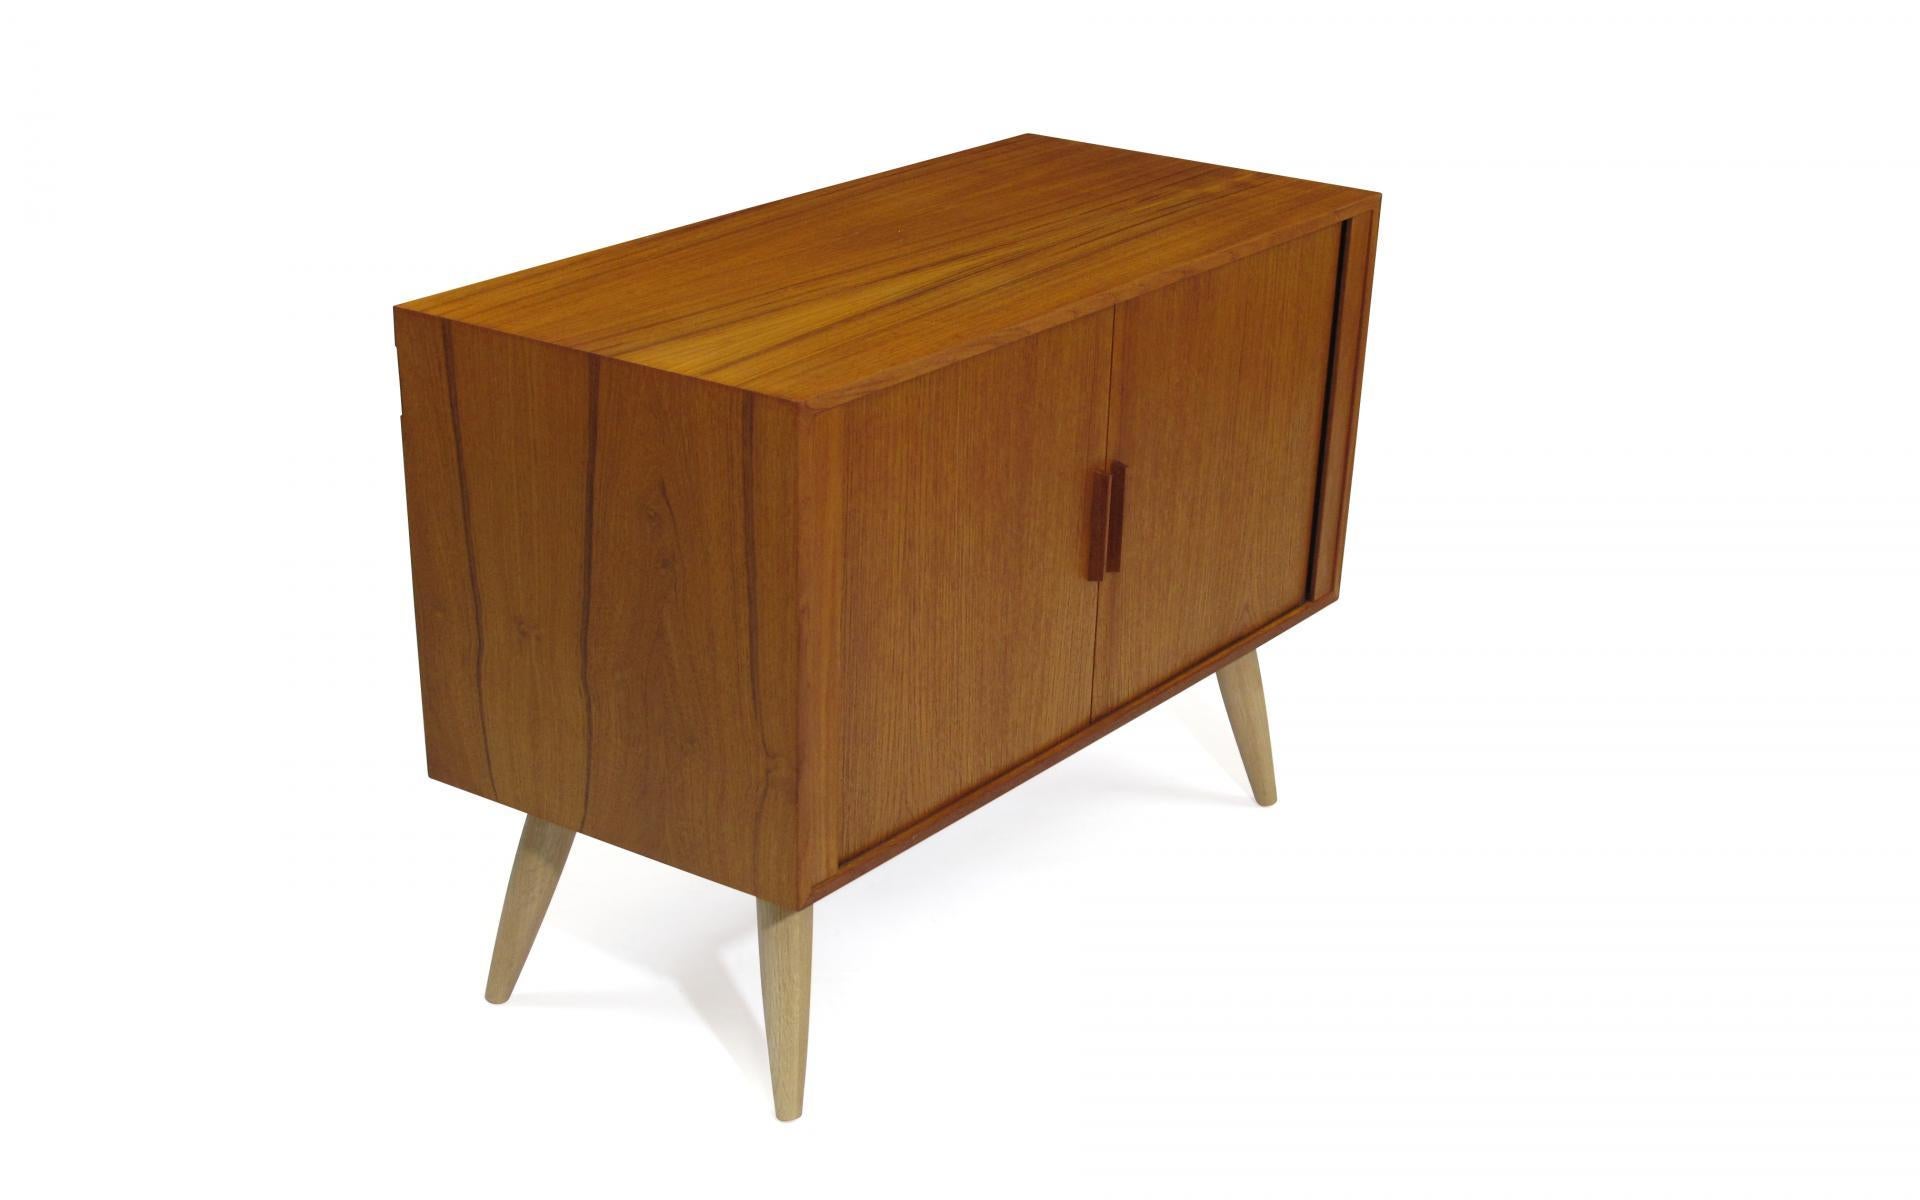 Midcentury Danish modern teak cabinet designed by Kai Kristiansen, manufactured in Denmark. Cabinet crafted of teak with tambour doors, and adjustable interior shelf, raised on solid oak tapered legs. Cabinet is fully restored in an excellent